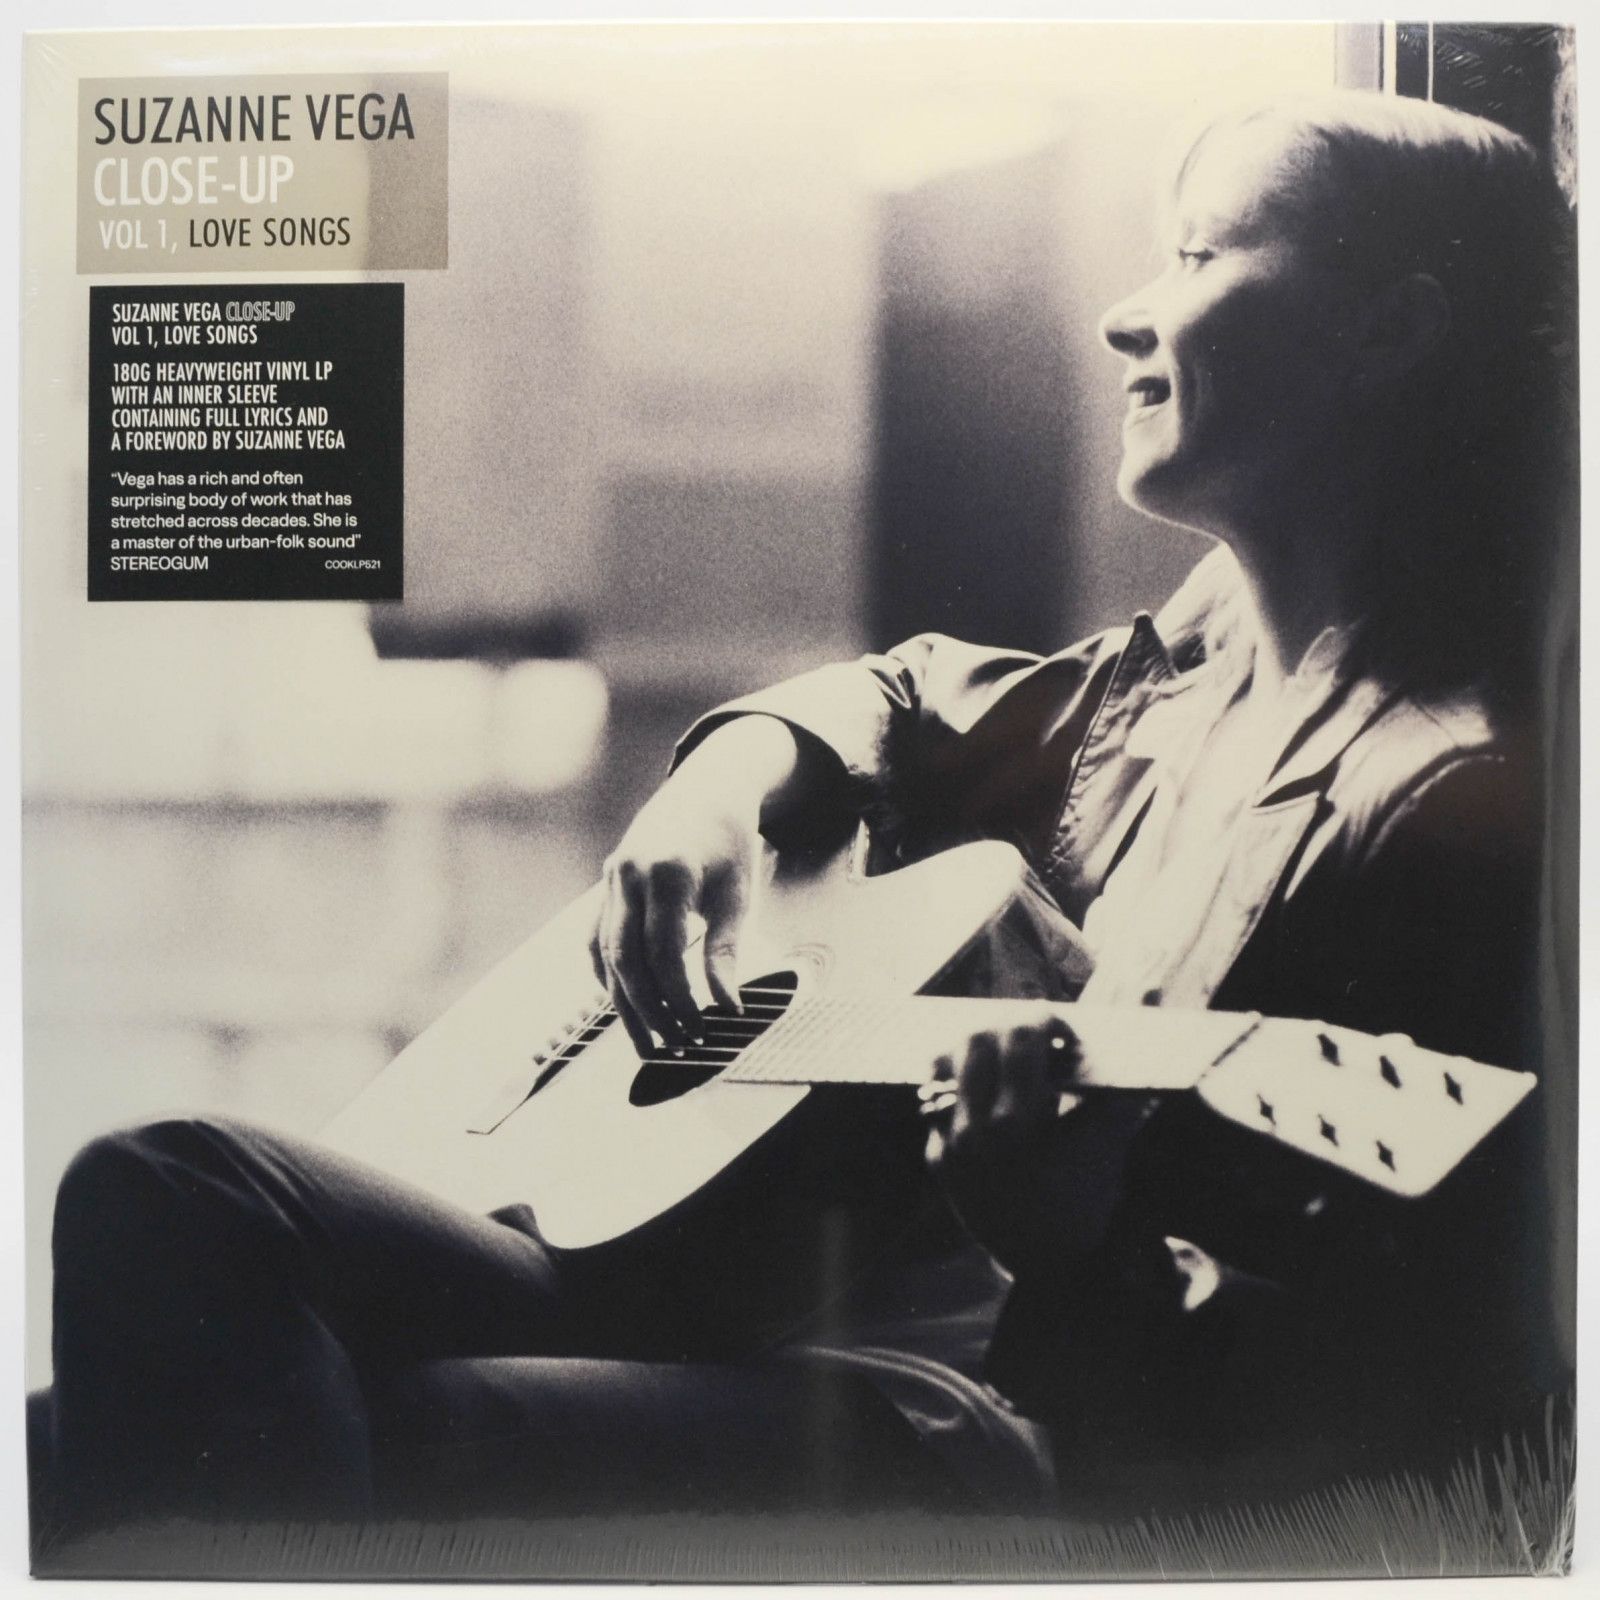 Suzanne Vega — Close-Up Vol 1, Love Songs, 2010